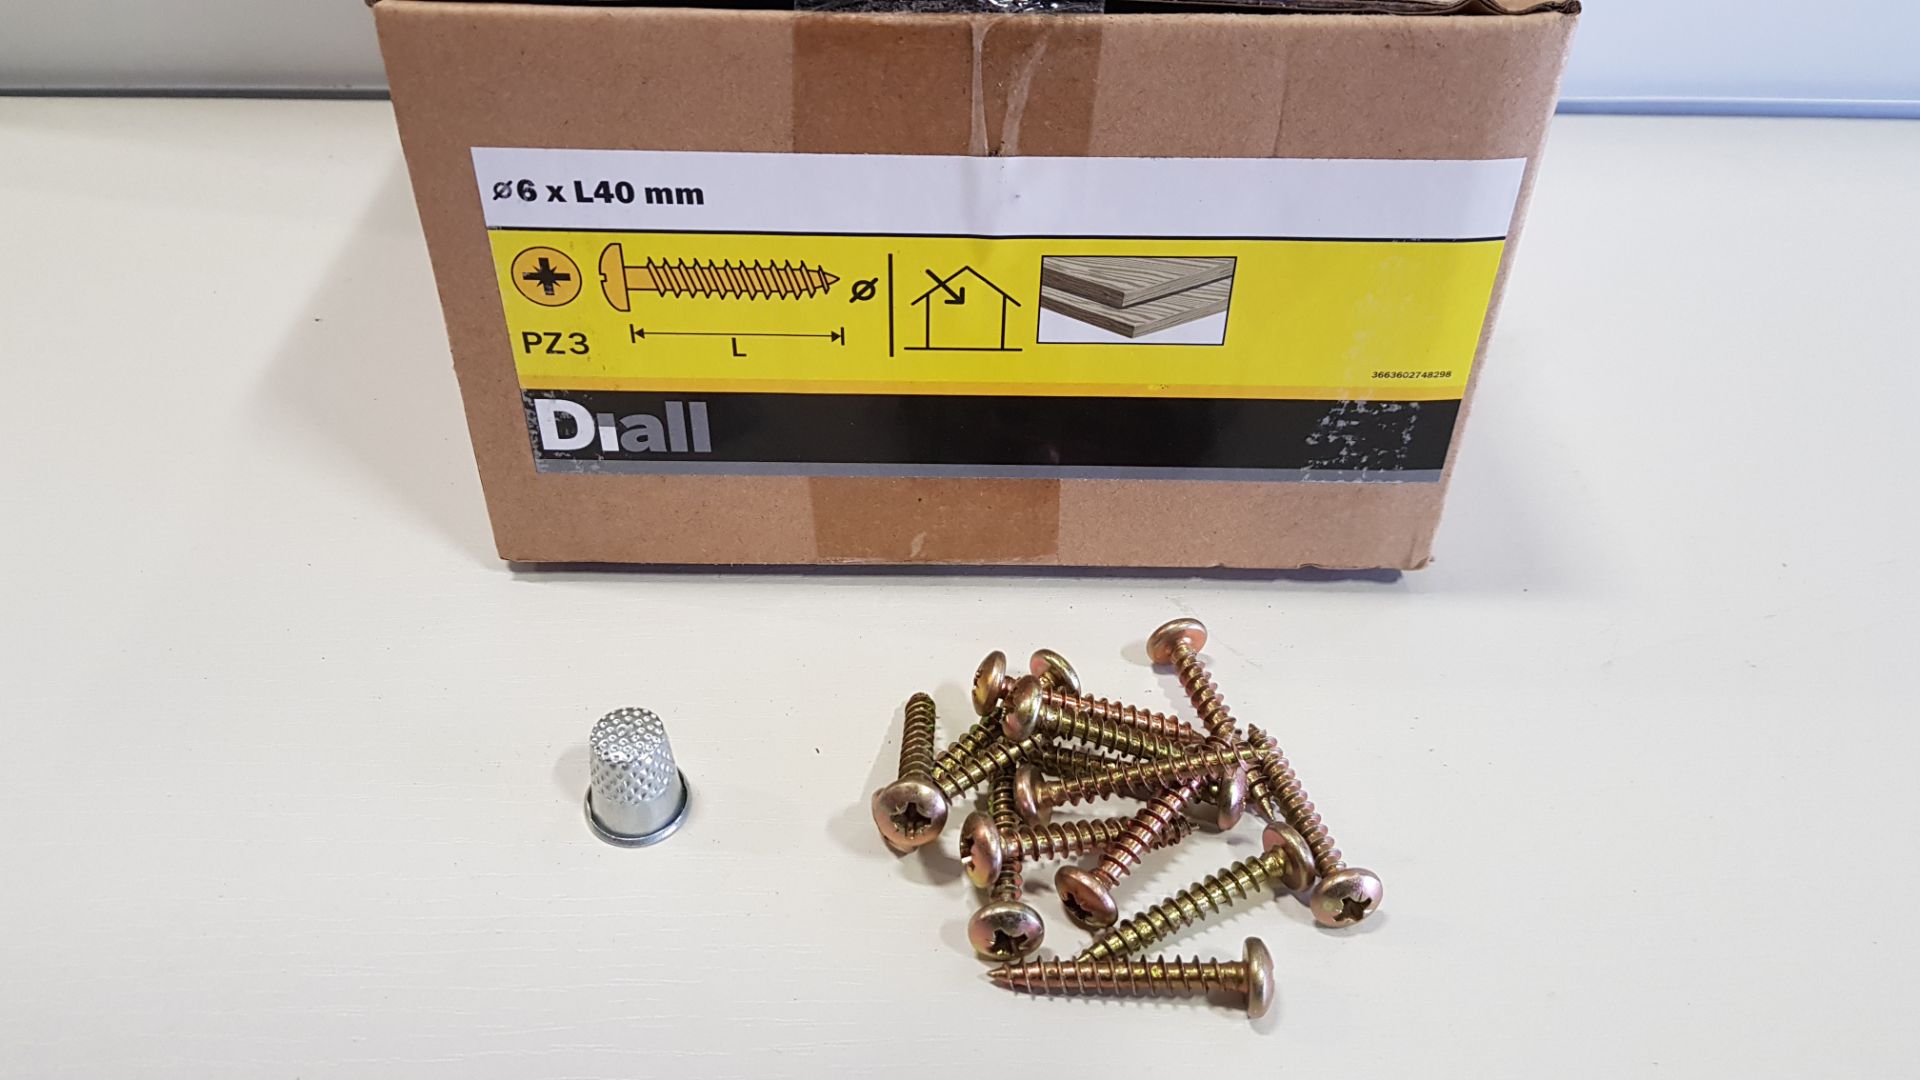 32,400 X BRAND NEW WOOD SCREW PAN YZP PZD 6 X 40 LOOSE IN 54 BOXES